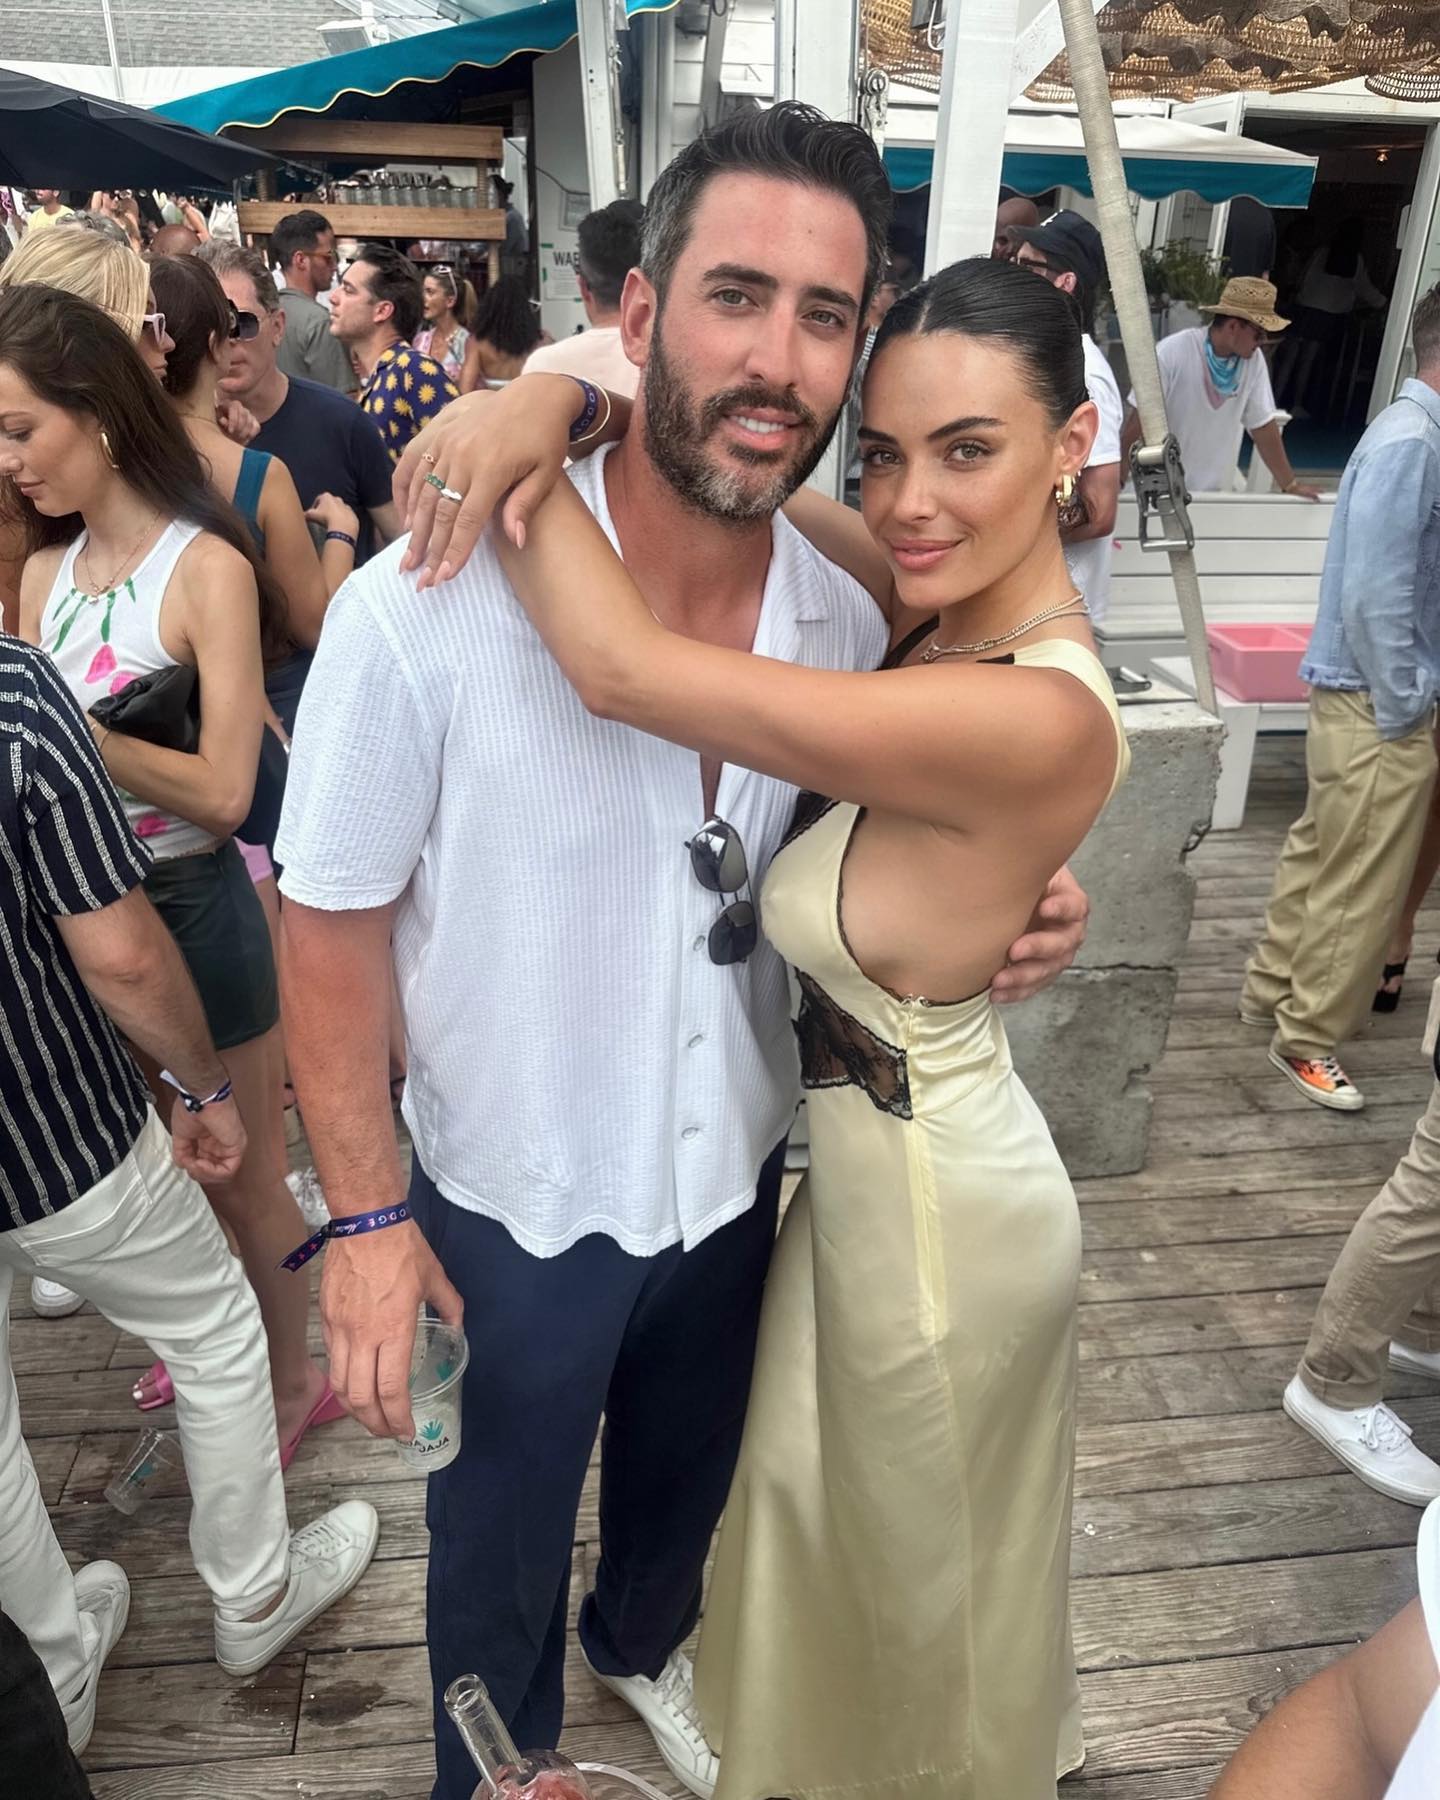 Matt Harvey And His Girlfriend Monika Clarke During A Day Out In New York